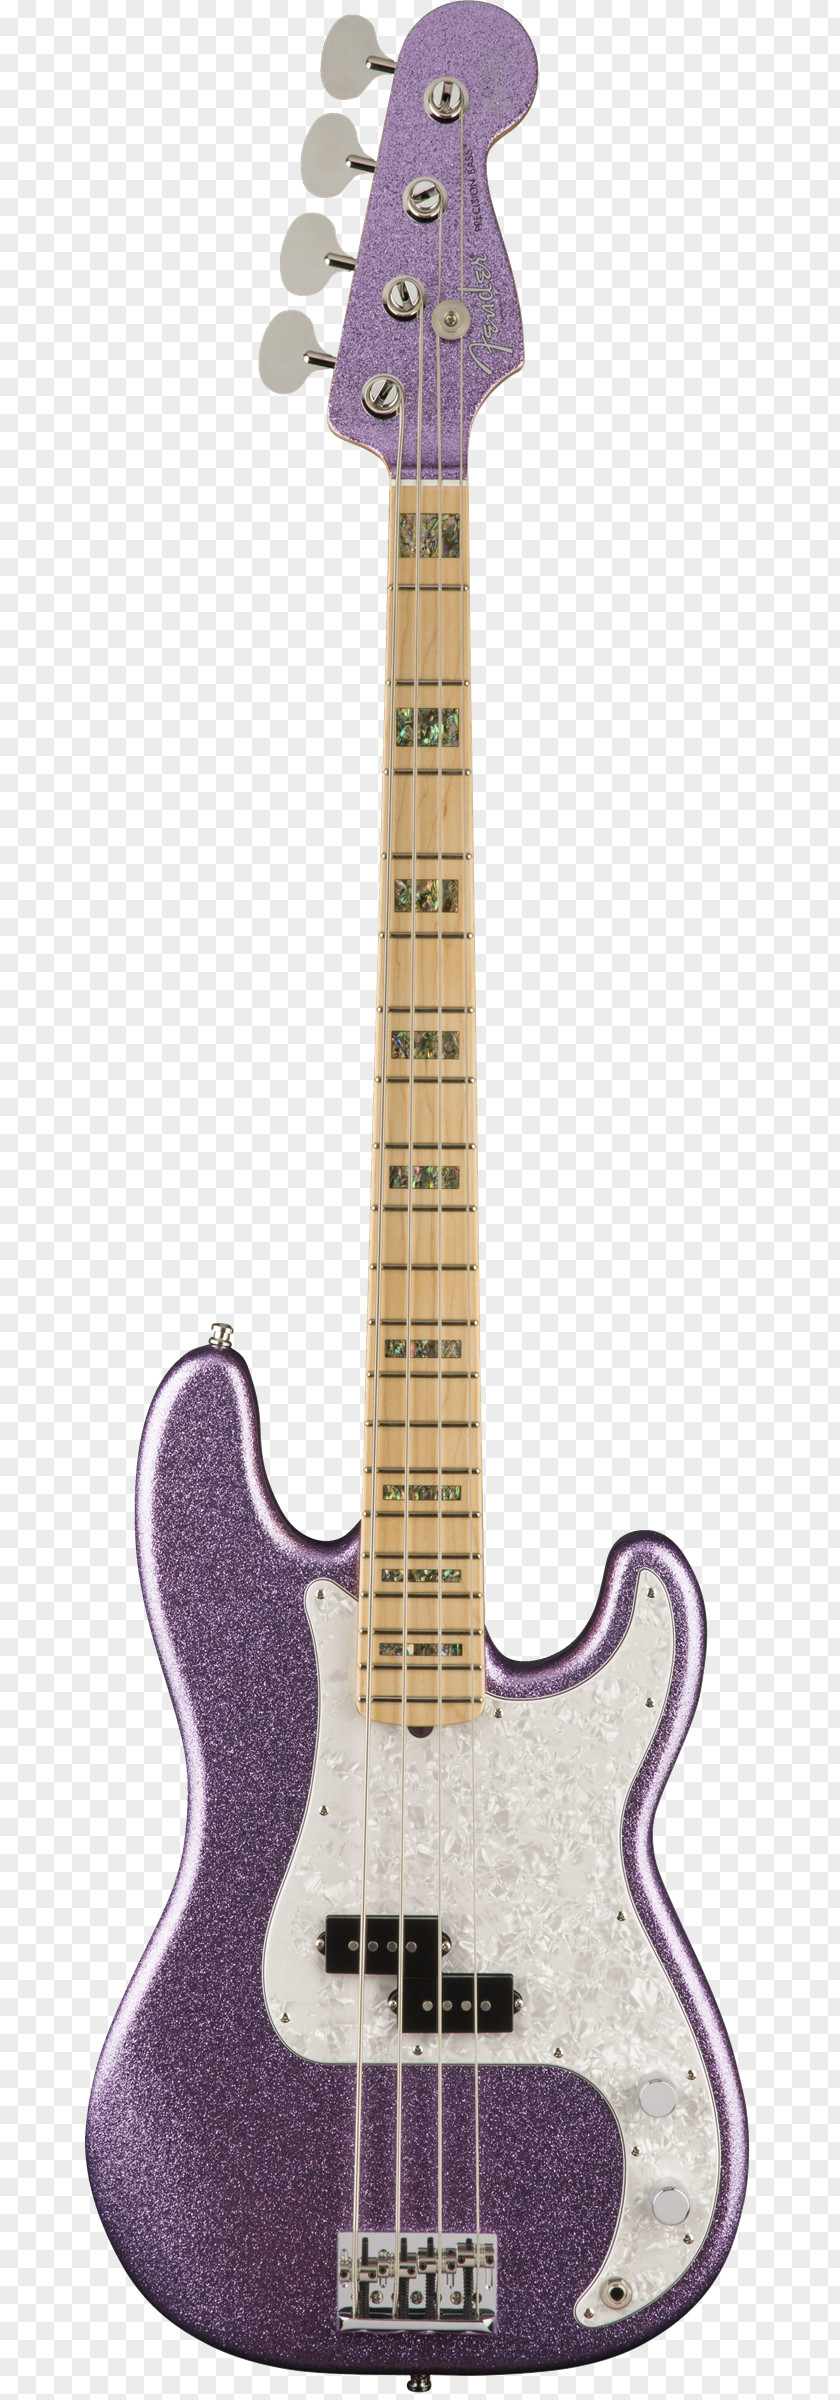 Stage Truss Fender Precision Bass Mustang Jazz Musical Instruments Corporation Guitar PNG